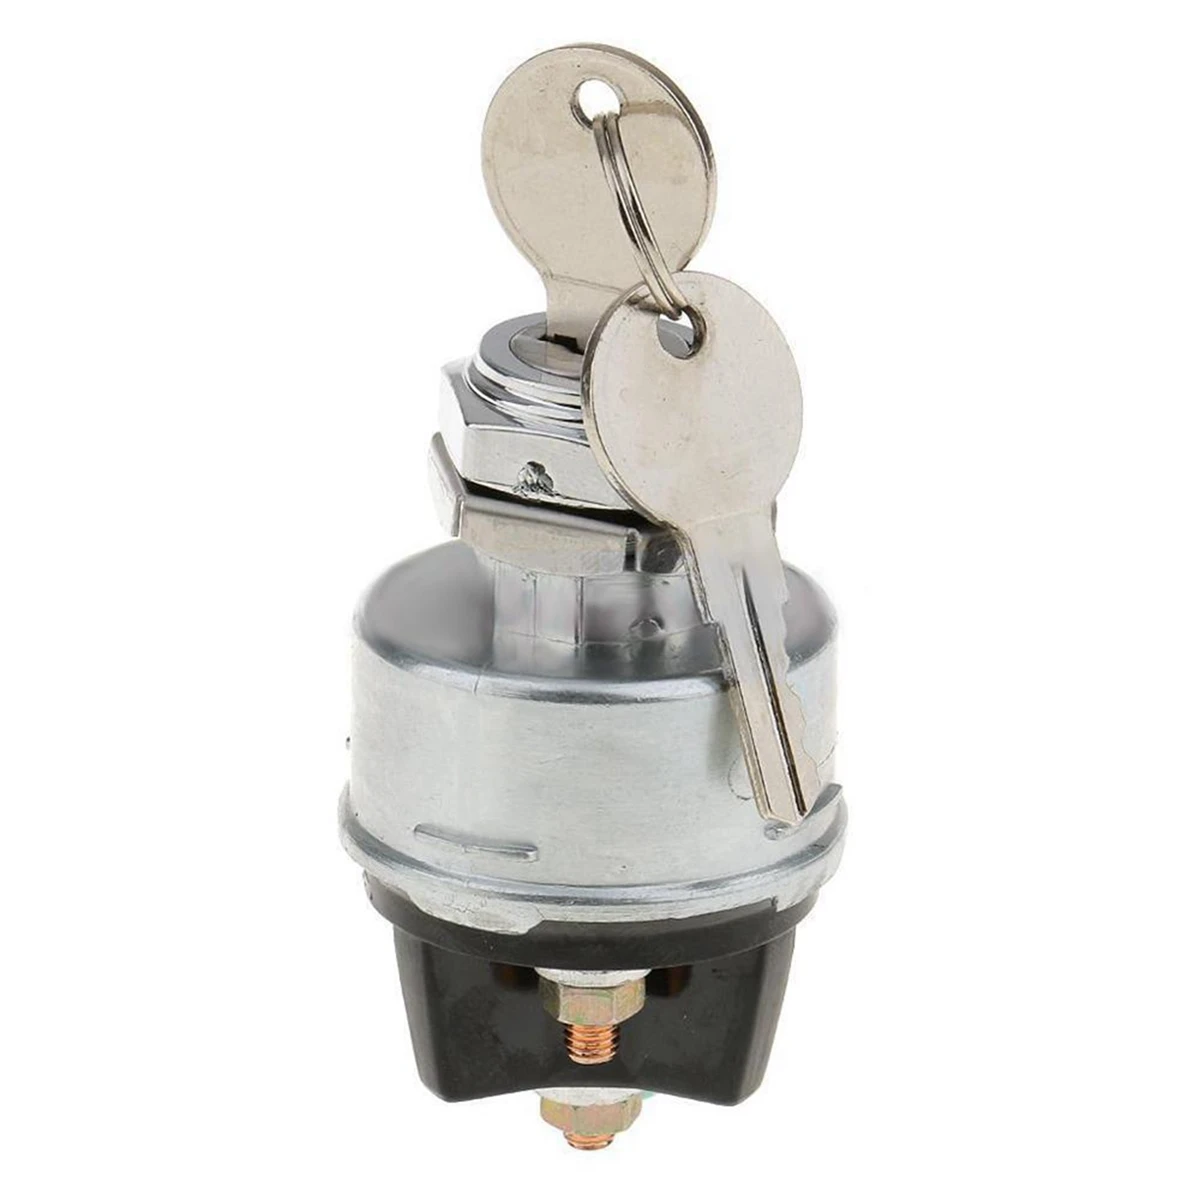 

12V Universal Ignition Switch with Keys Ignition Starter for Forklift Tractor